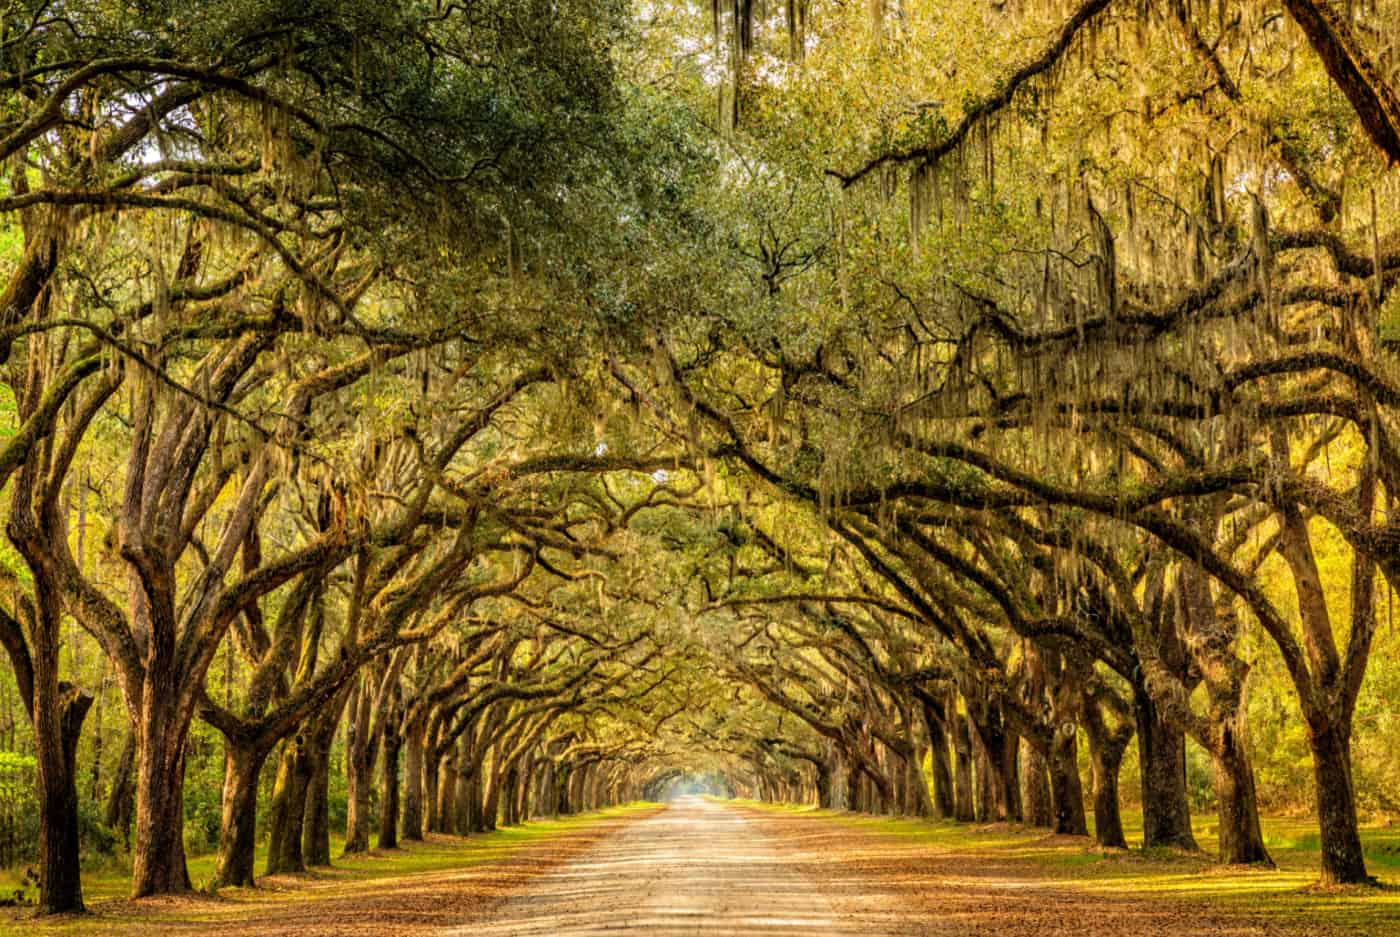 How to Spend Three Days in Savannah: An In-Depth Itinerary for 2022